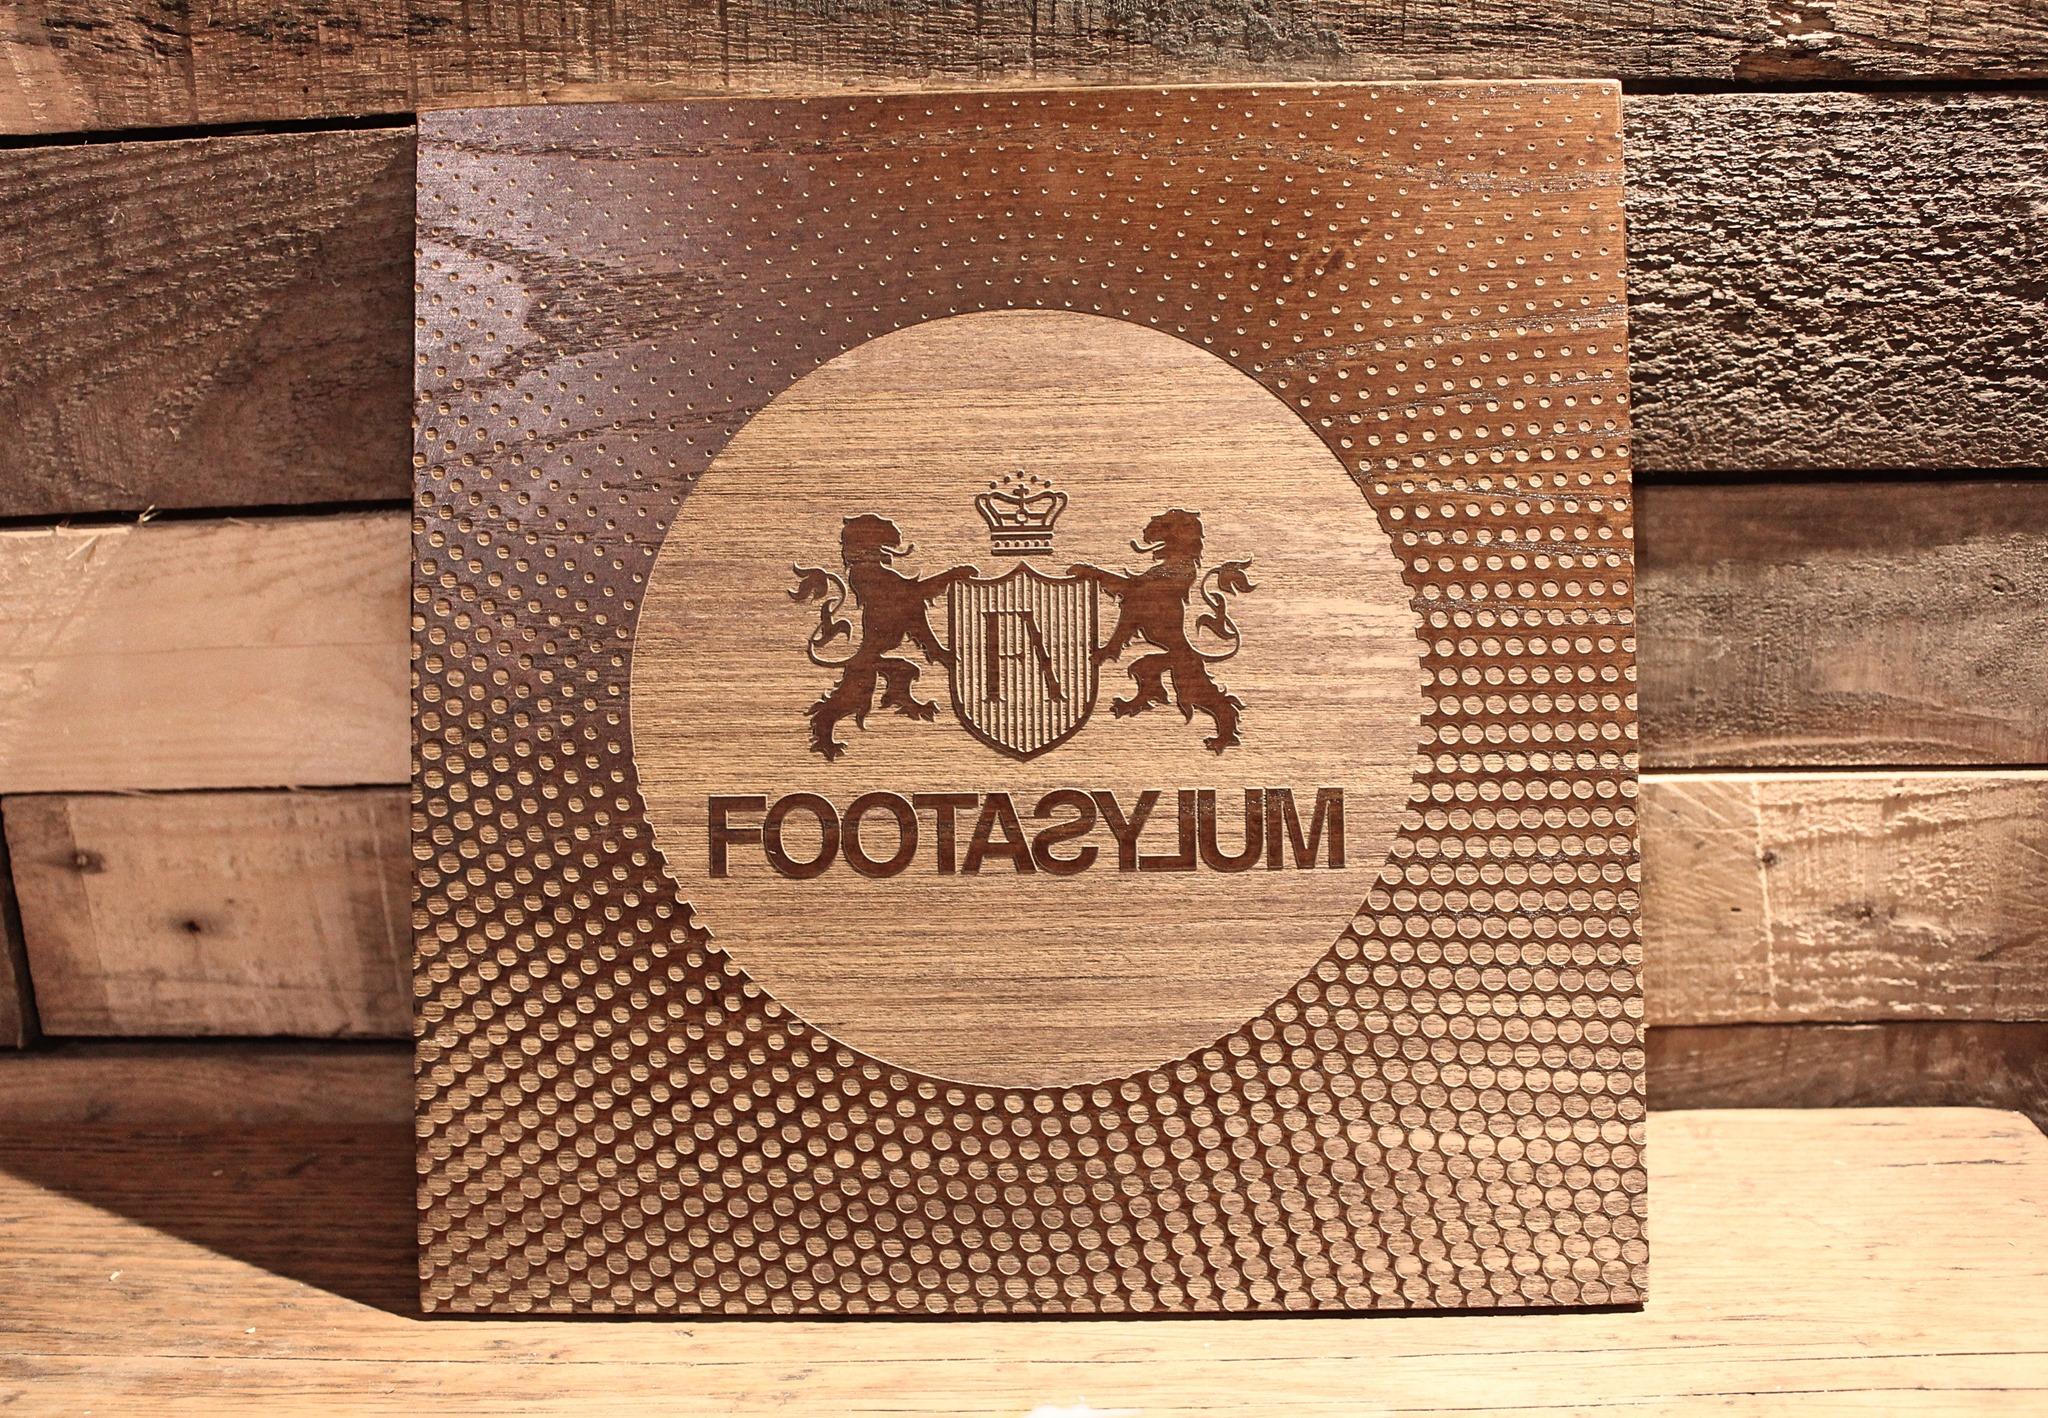 Product Laser Cutting Services | Laser Cutting, Engraving, Signage & More image